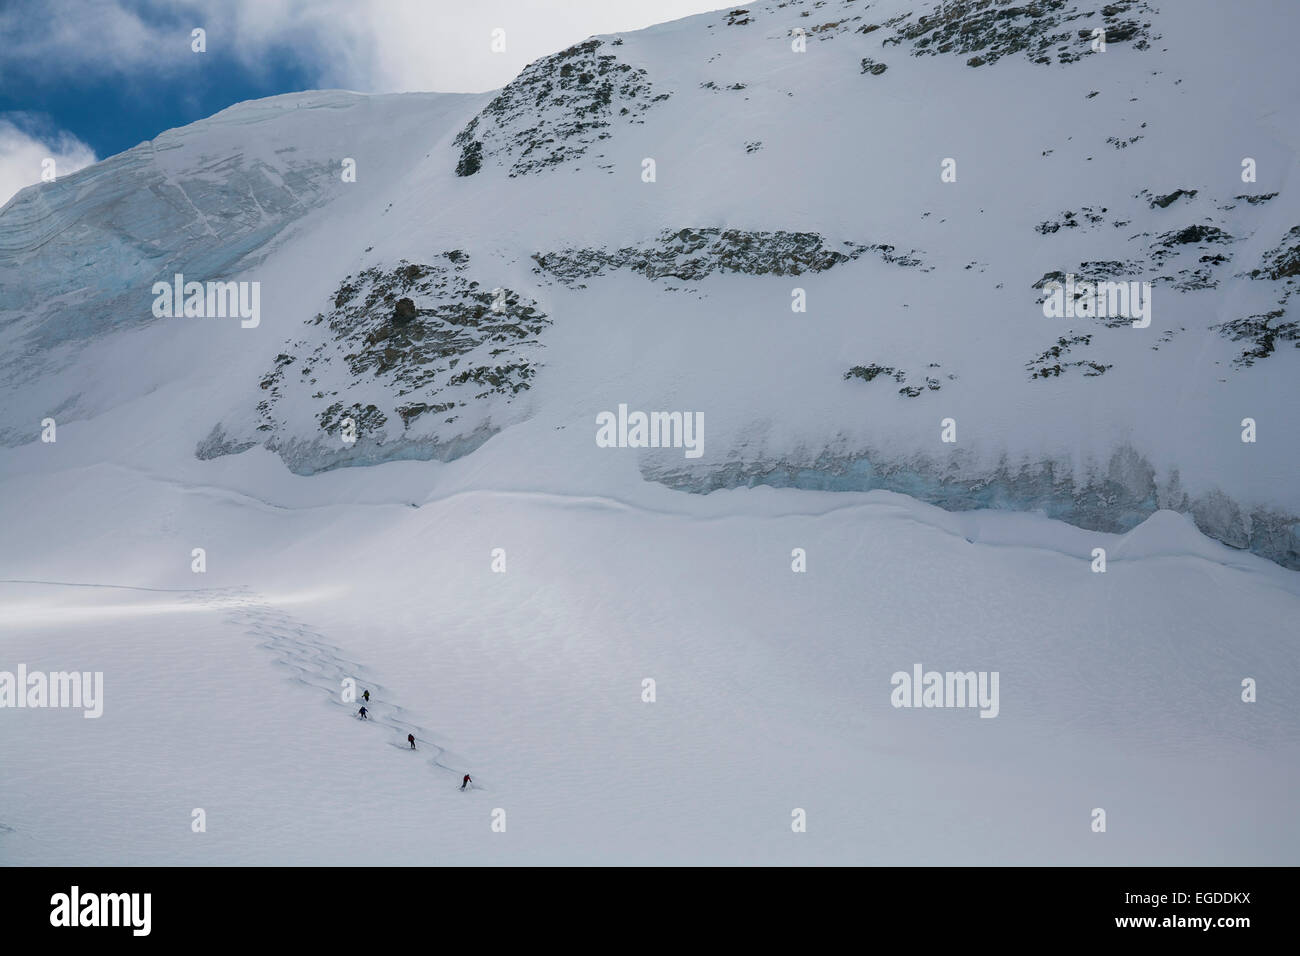 Group of skier downhill skiing on glacier Durand to Val d Anniviers, Canton of Valais, Schwitzerland Stock Photo